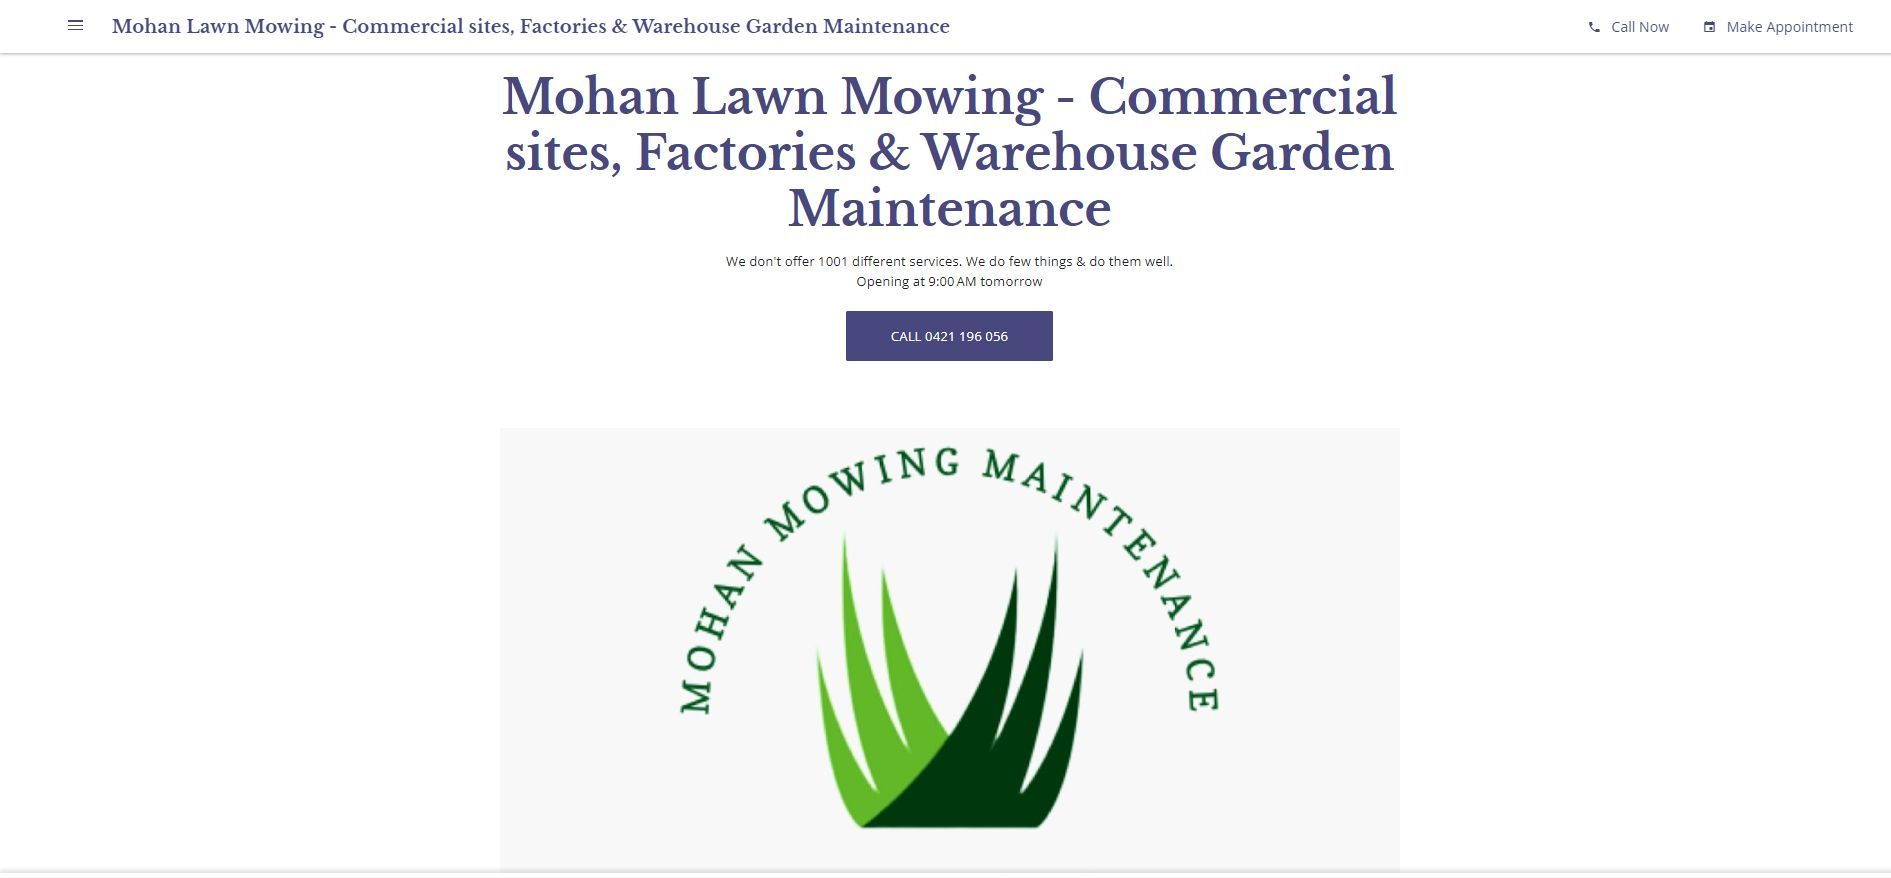 mohan lawn mowing commercial sites, factories & warehouse garden maintenance we don t offer 1001 different services. we do few things & do them well. 2023 10 21 12 11 17